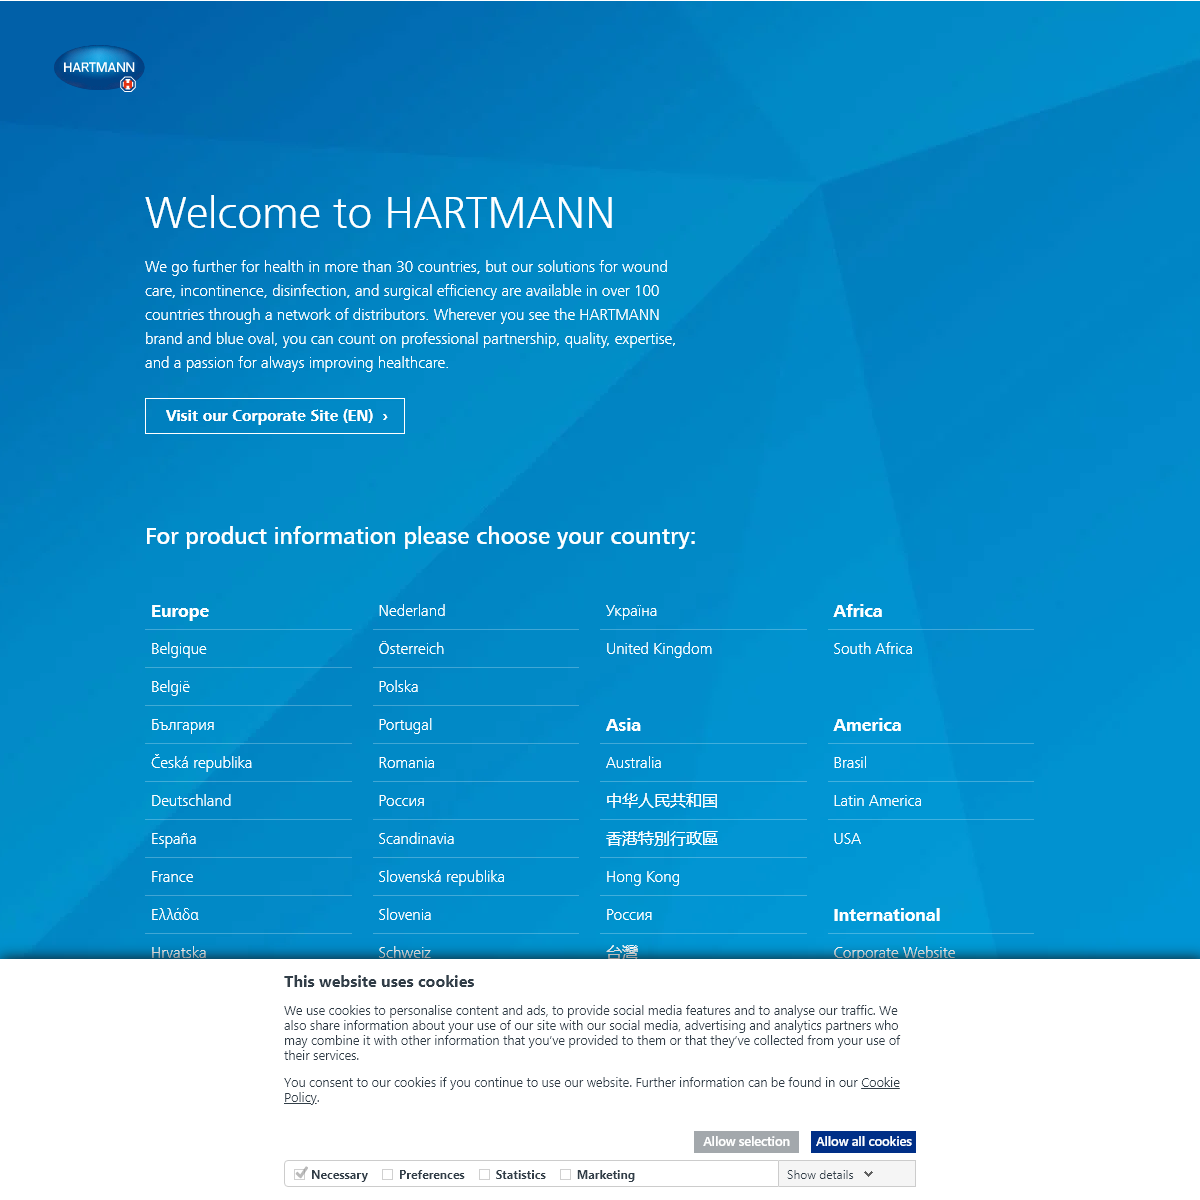 A complete backup of hartmann.info